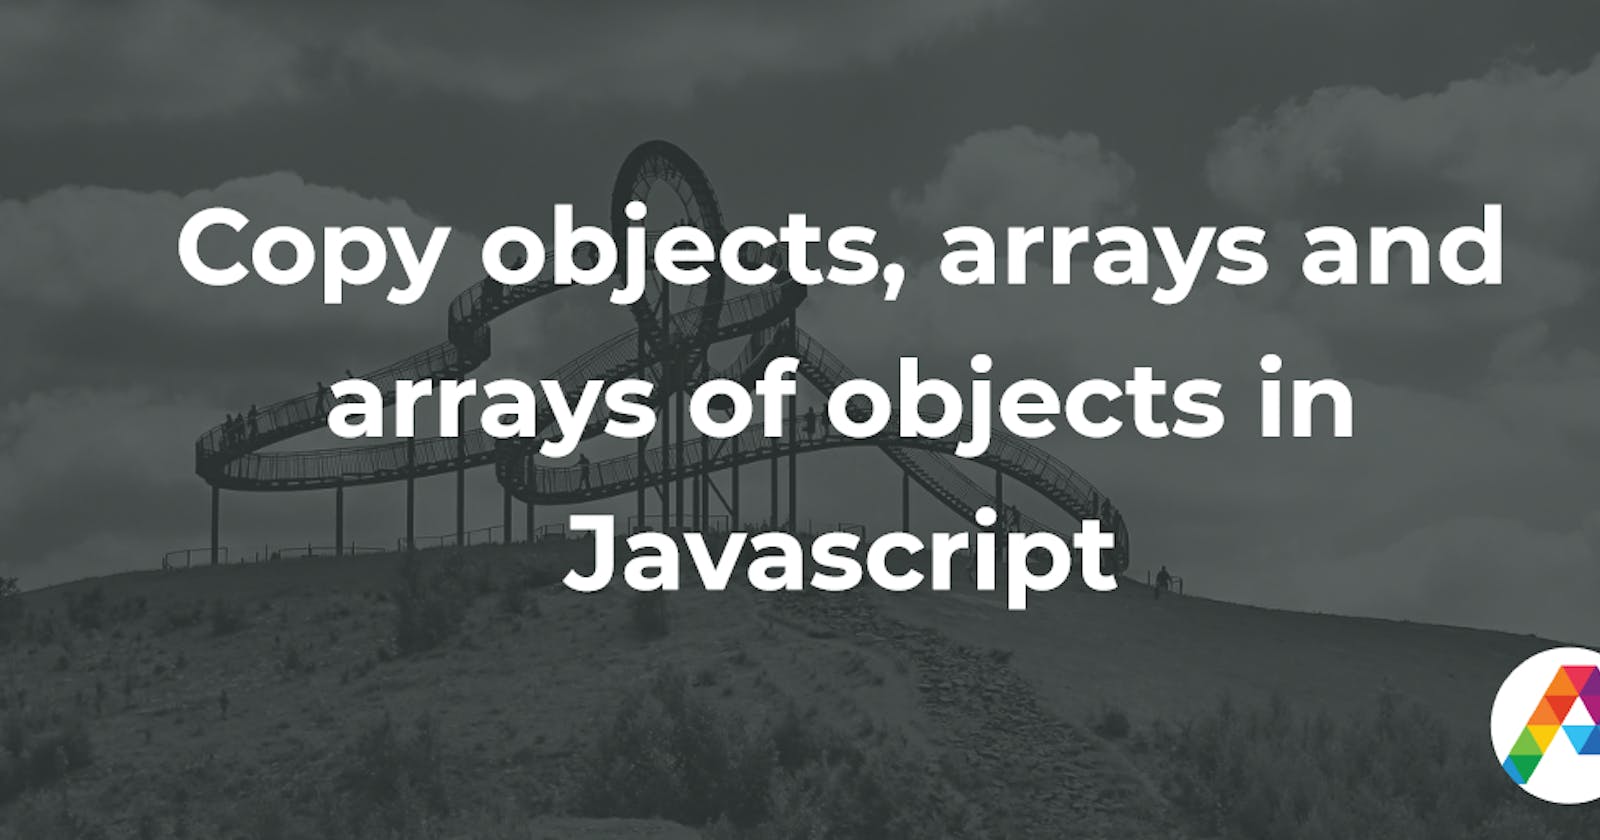 Copy objects, arrays and arrays of objects in Javascript